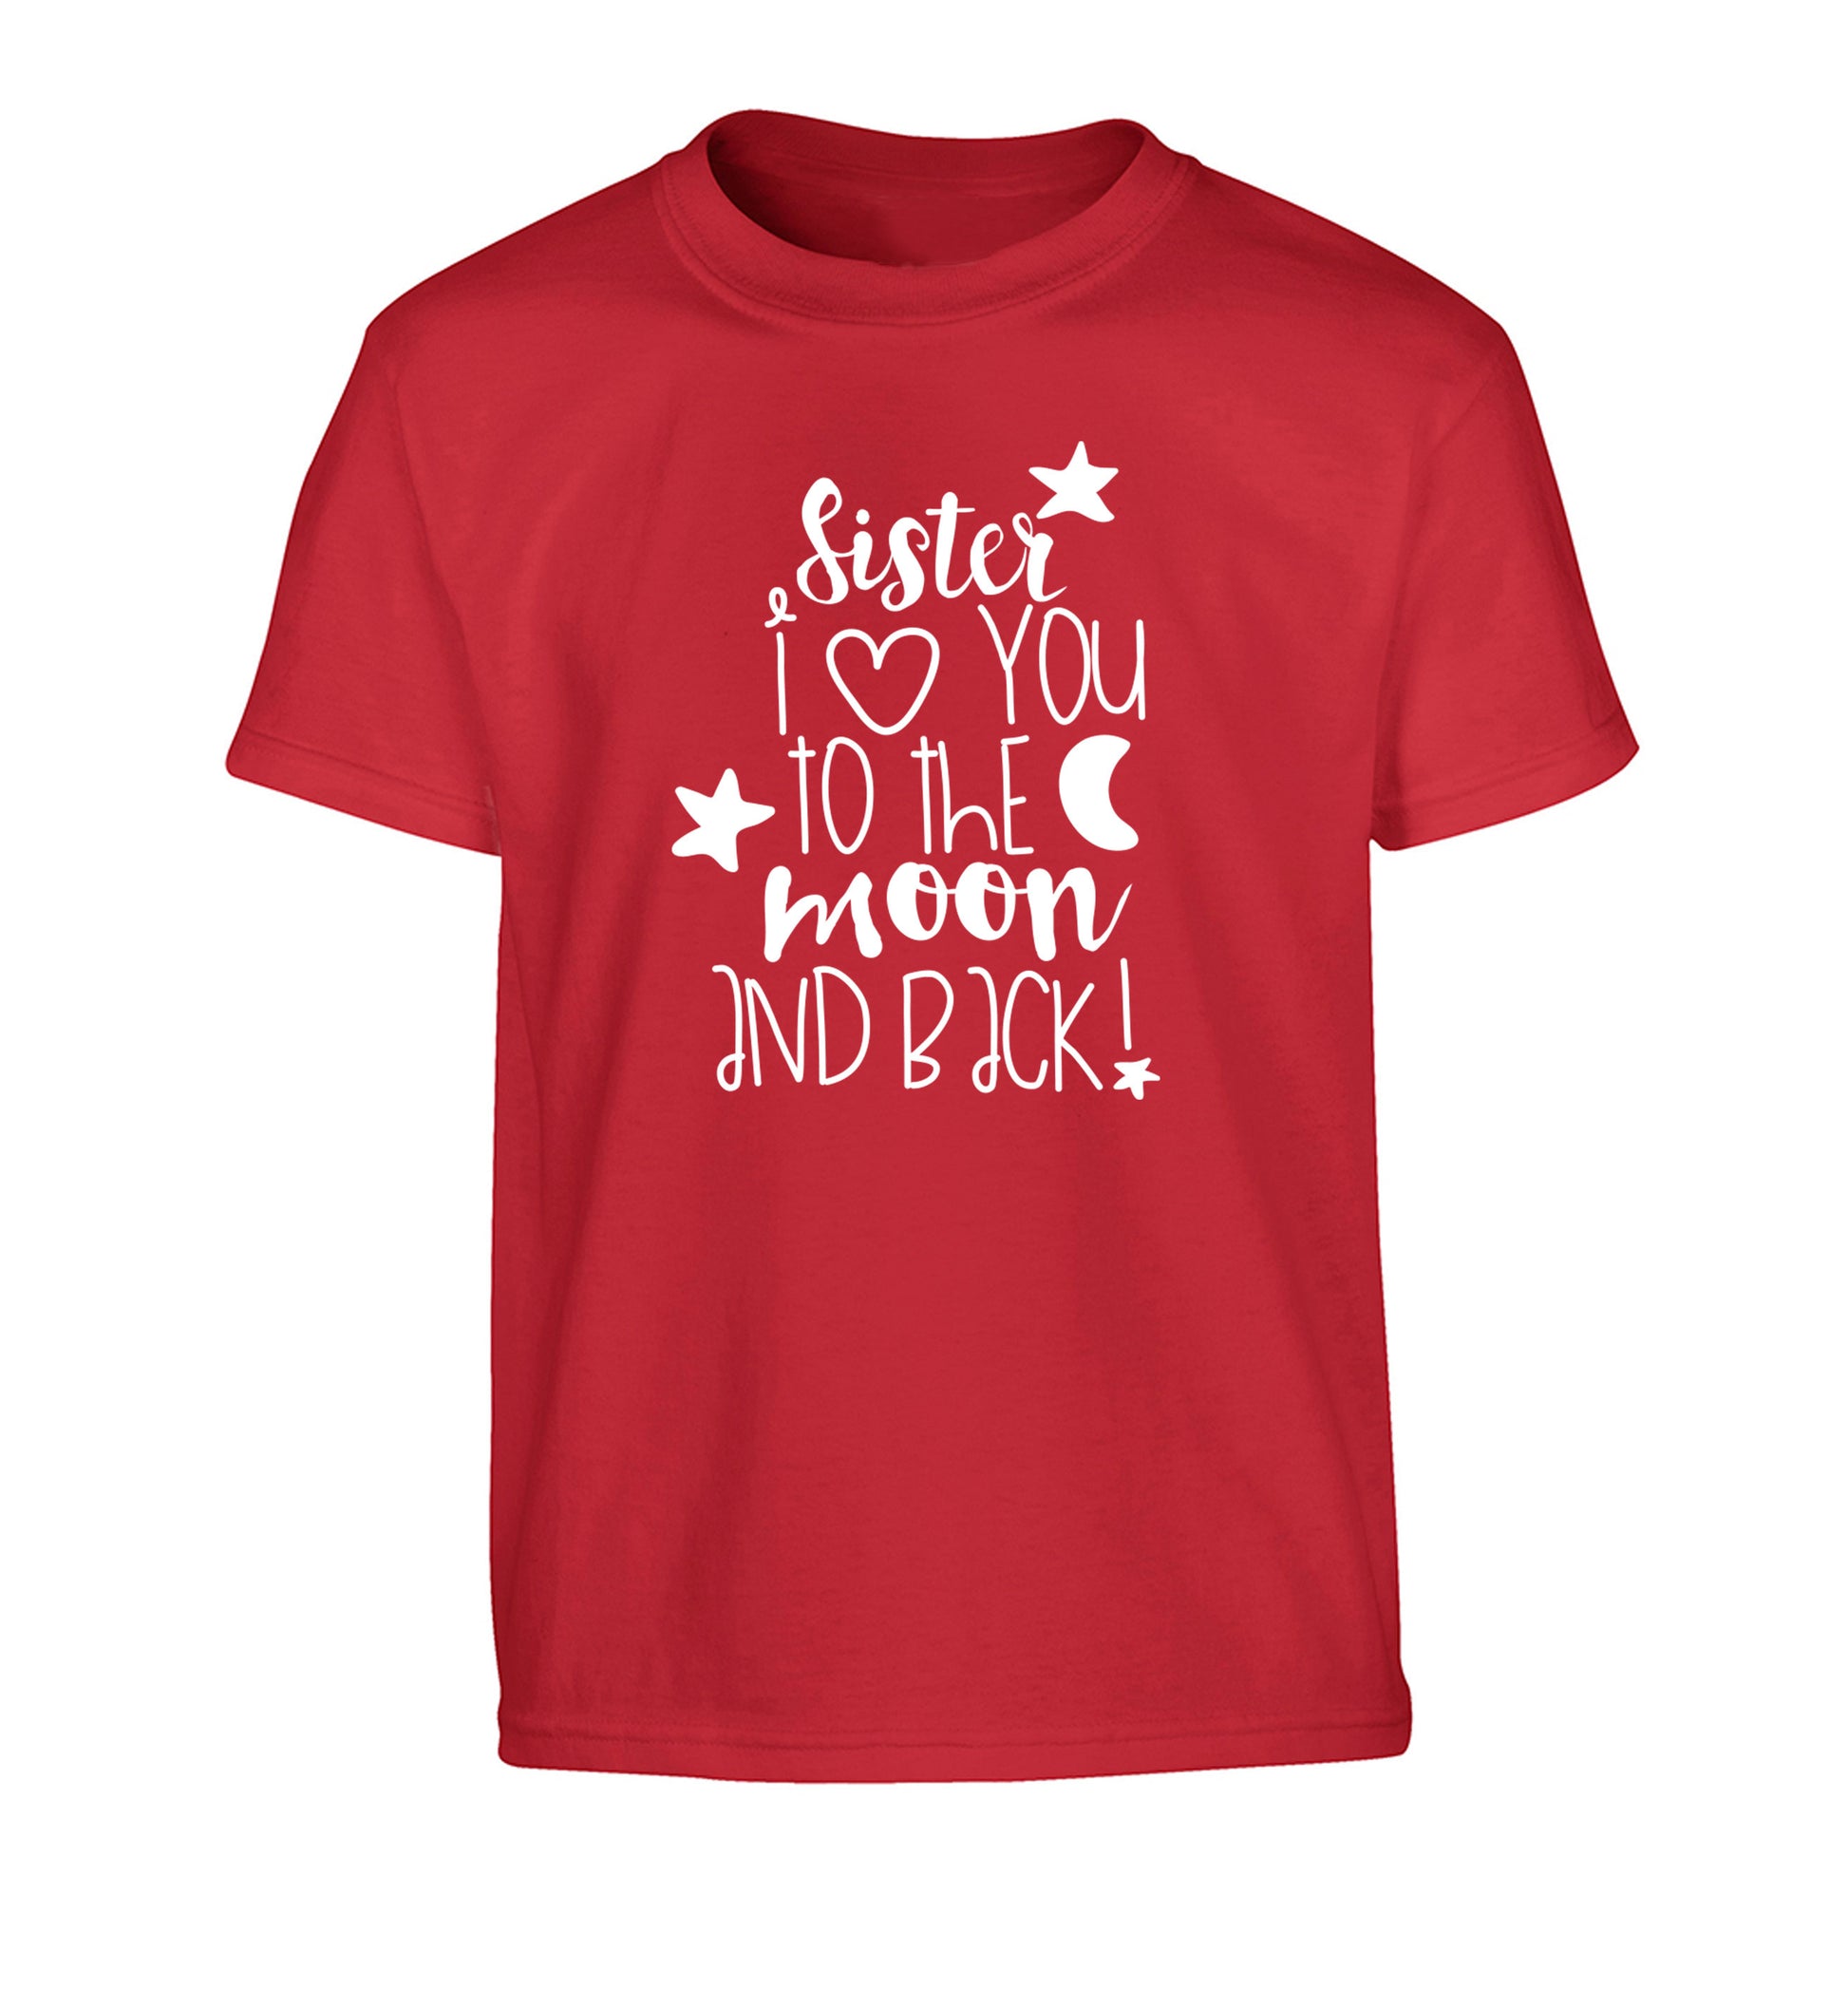 Sister I love you to the moon and back Children's red Tshirt 12-14 Years